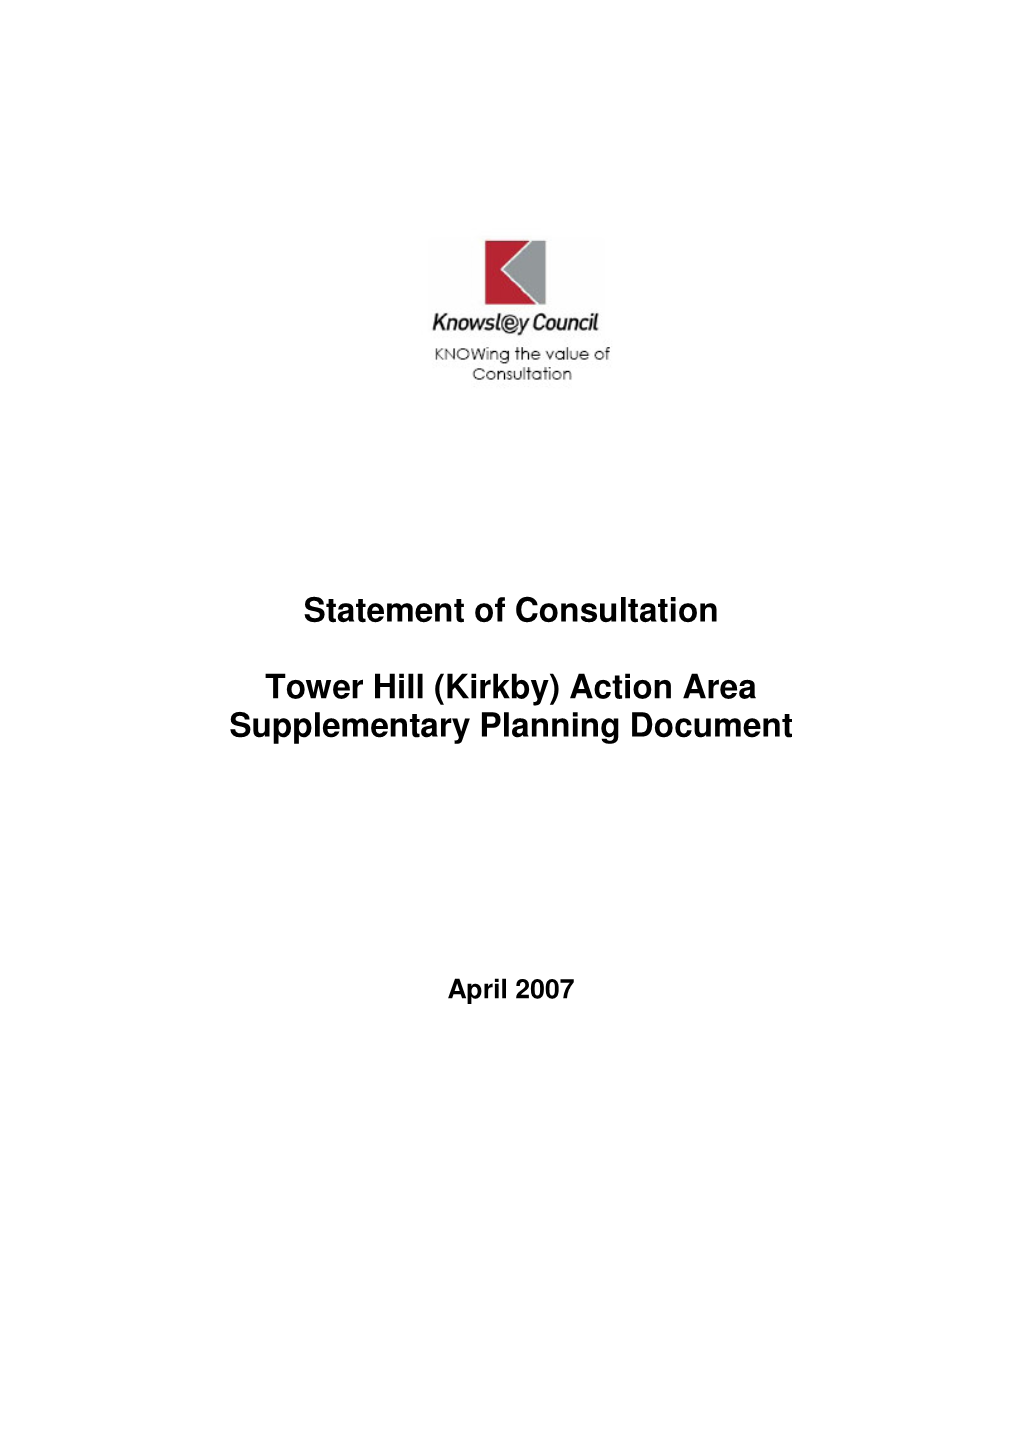 Statement of Consultation Tower Hill (Kirkby) Action Area Supplementary